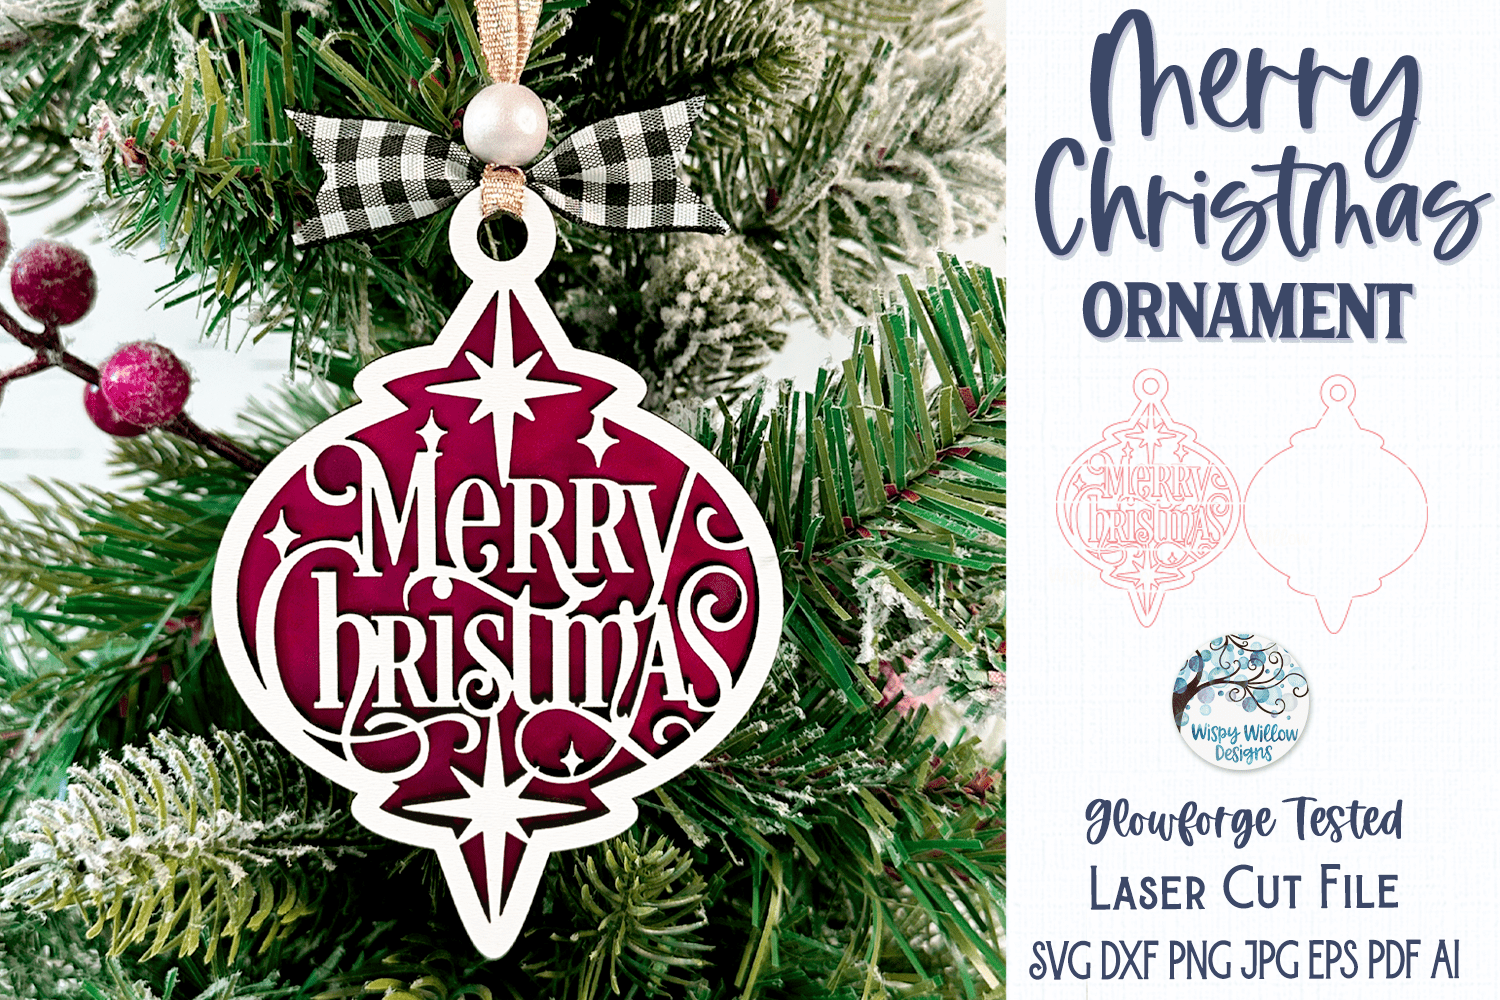 Merry Christmas Ornament for Glowforge or Laser Cutter Wispy Willow Designs Company